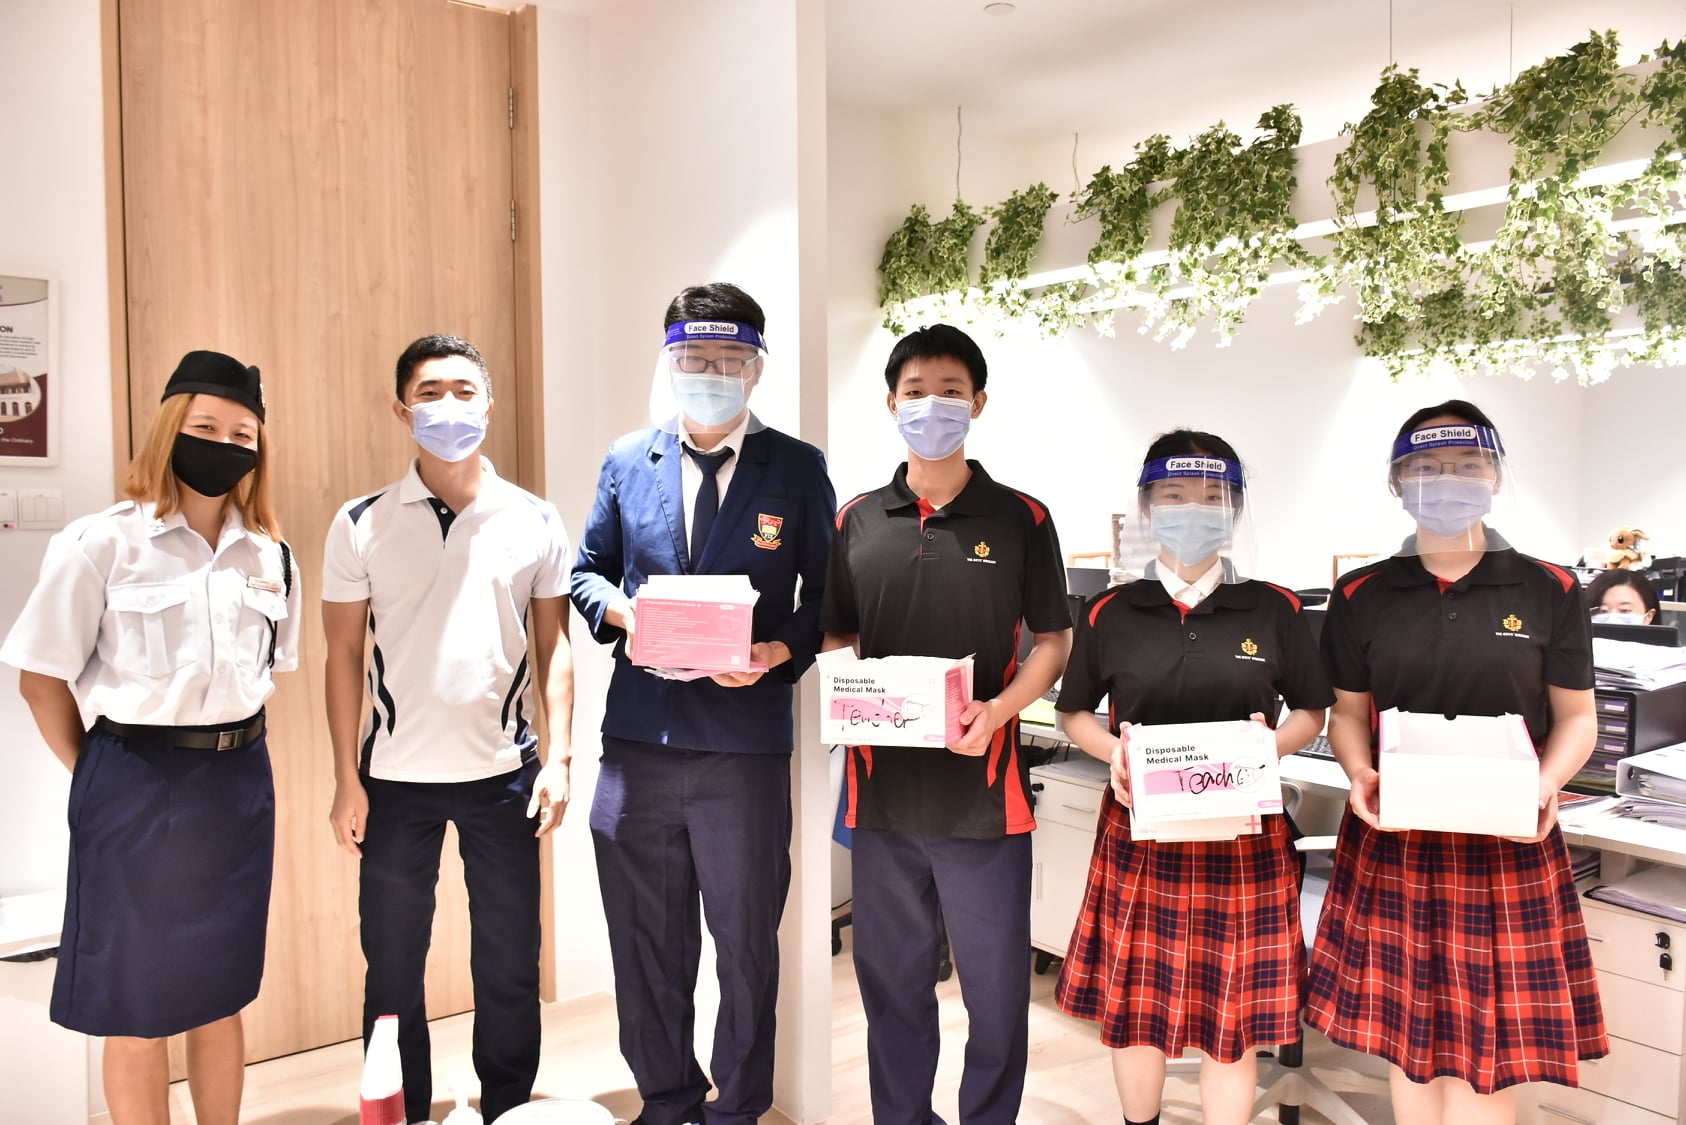 FIS BBGB members giving out masks to Teachers